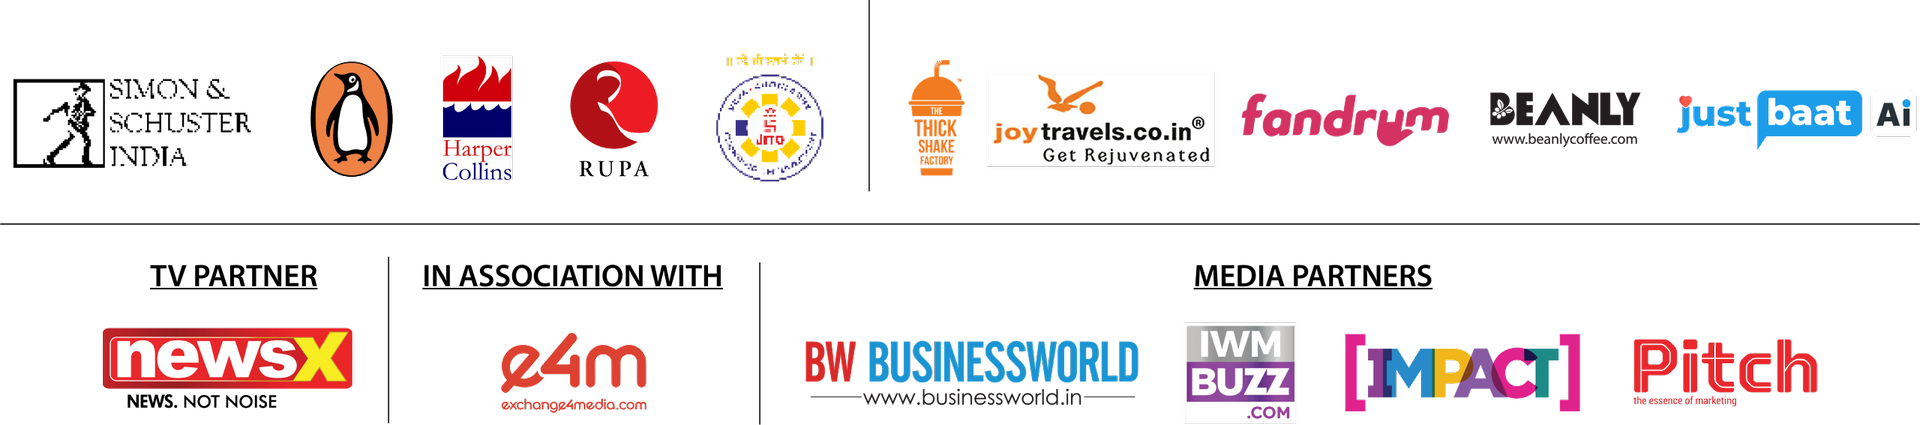 JoyTravels, Fandrum, IWM BUZZ, Beanly, The Thick shake Factory, Exhange4Media, Institute of Management Technology - Ghazizabad Delhi NCR, Impact, Pitch, AACSB